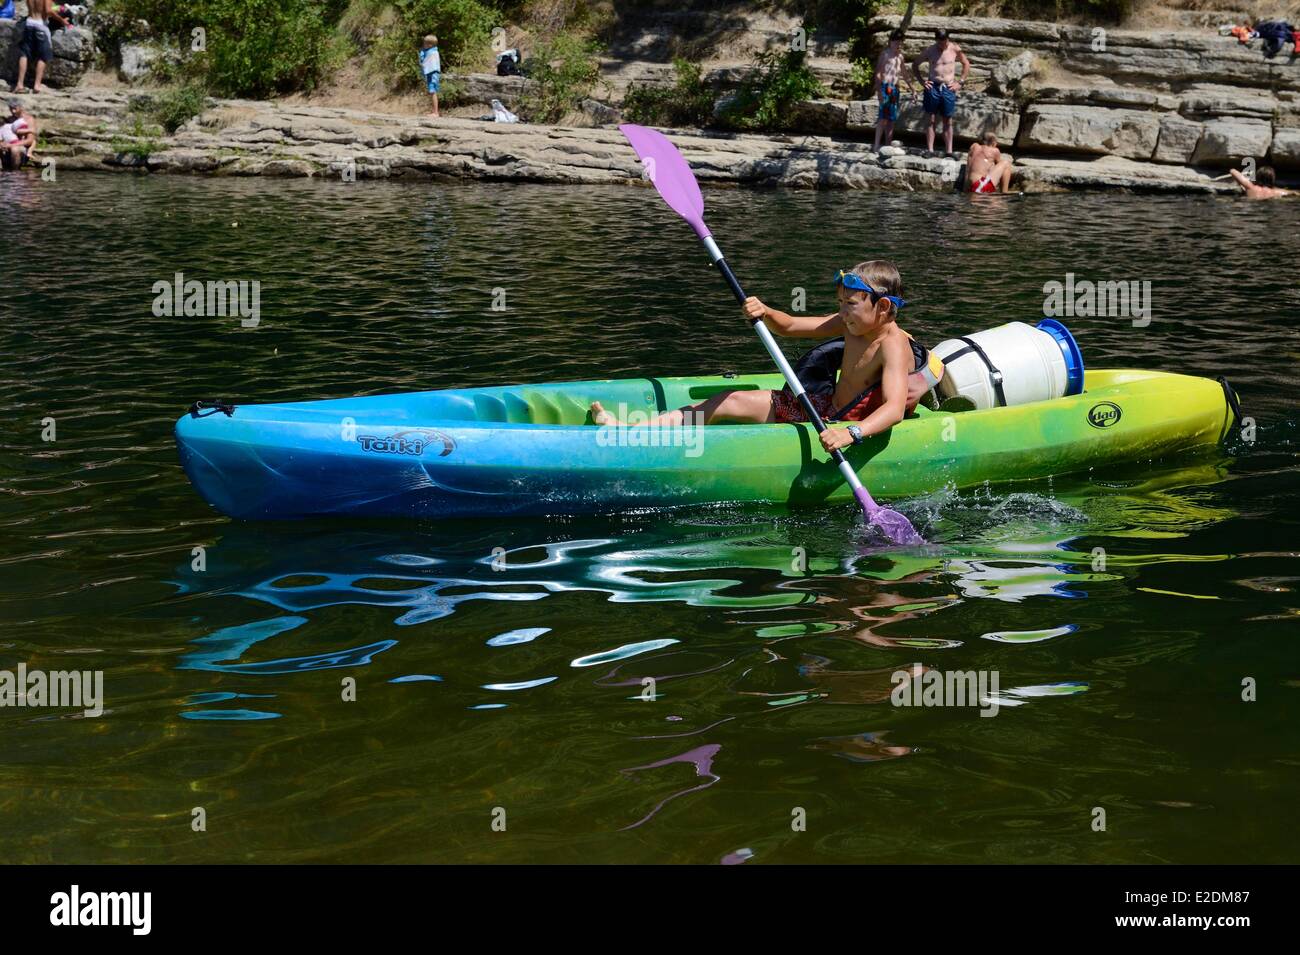 France Ardeche Les Vans kayaks going down the Chassezac River Stock Photo -  Alamy